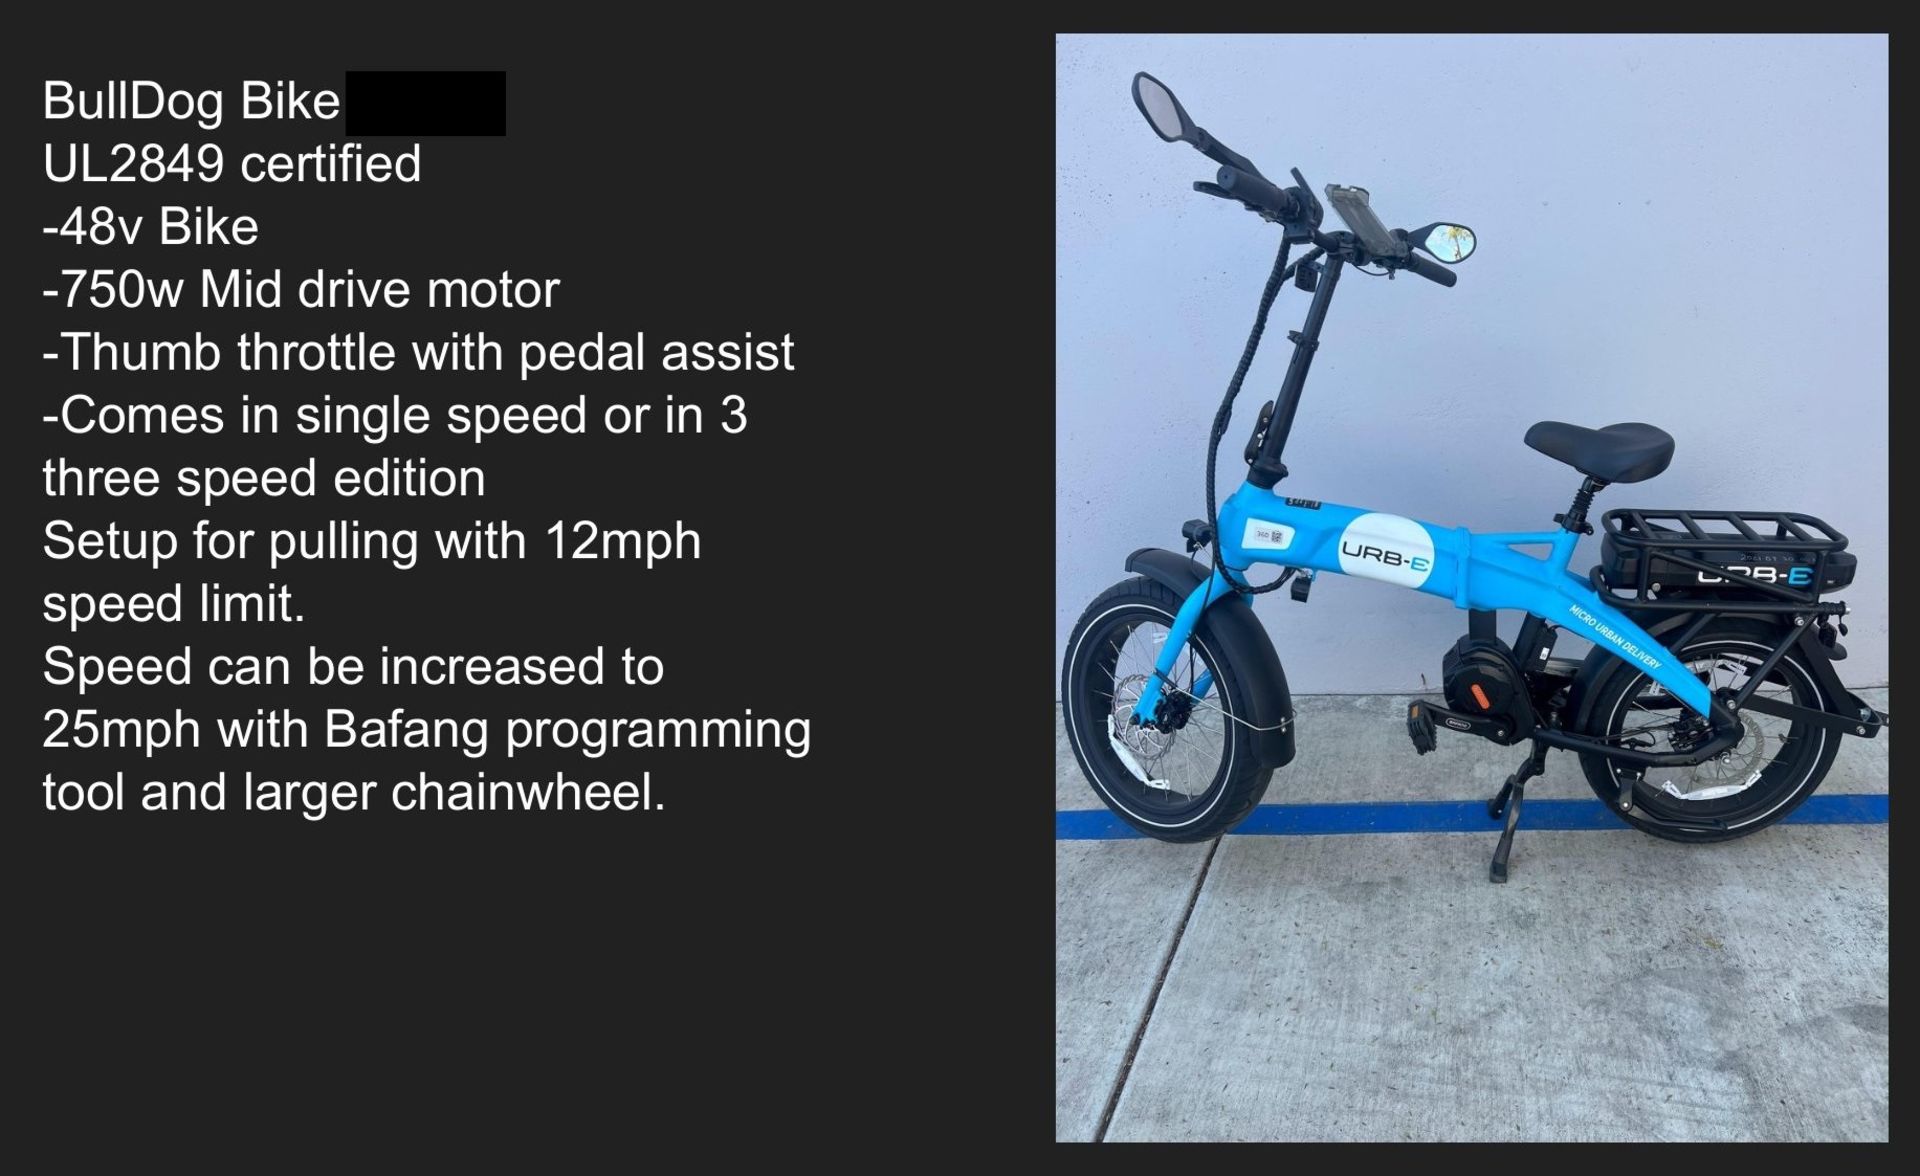 URB-E ELECTRIC DELIVERY BIKE, USED, 750W MID DRIVE MOTOR, SINGLE SPEED, THUMB THROTTLE WITH PEDAL - Image 4 of 4